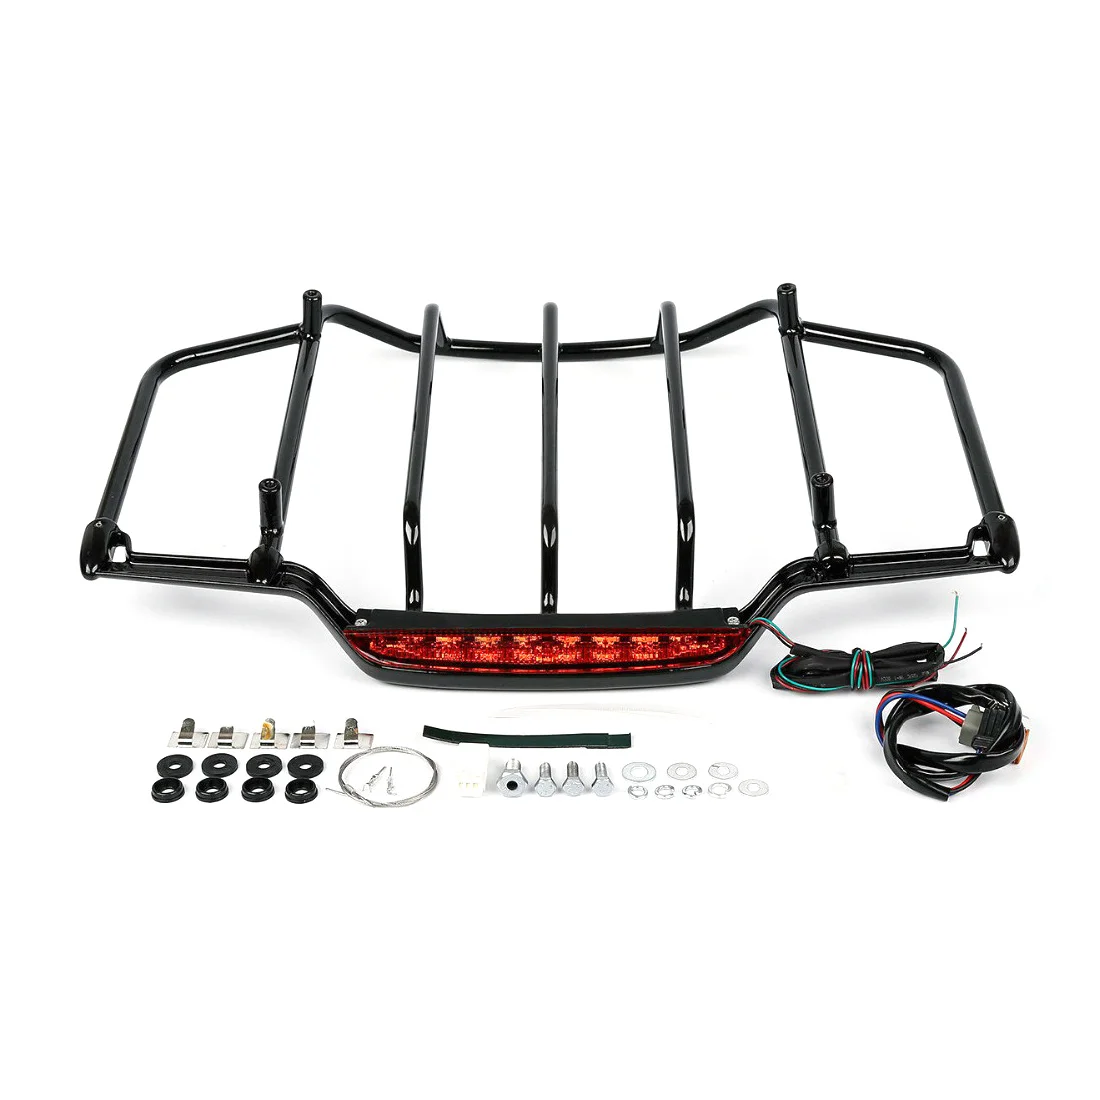 

Motorcycle Luggage Rack with LED Light for Harley Touring Tour Pak Road King Electra Glide Road Glide 1993-2013